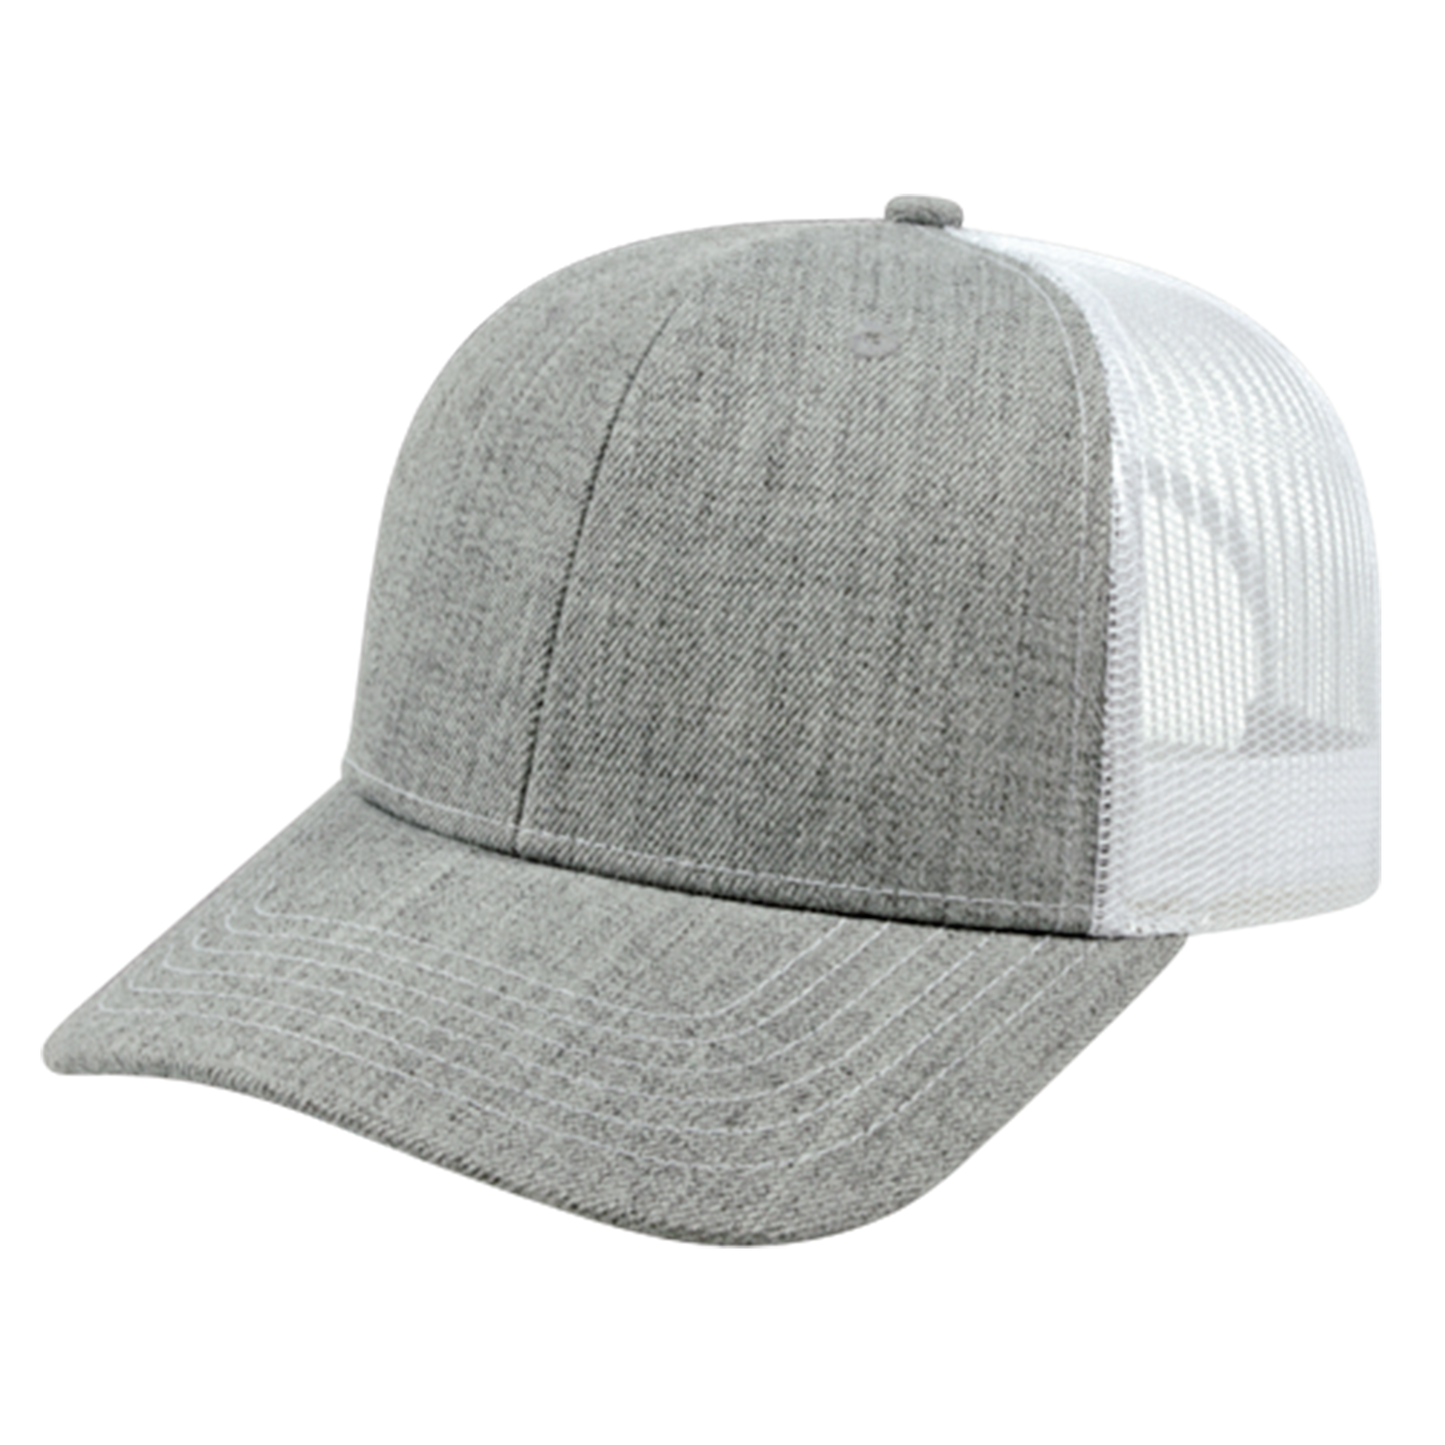 Blended Wool Acrylic with Mesh Back Cap